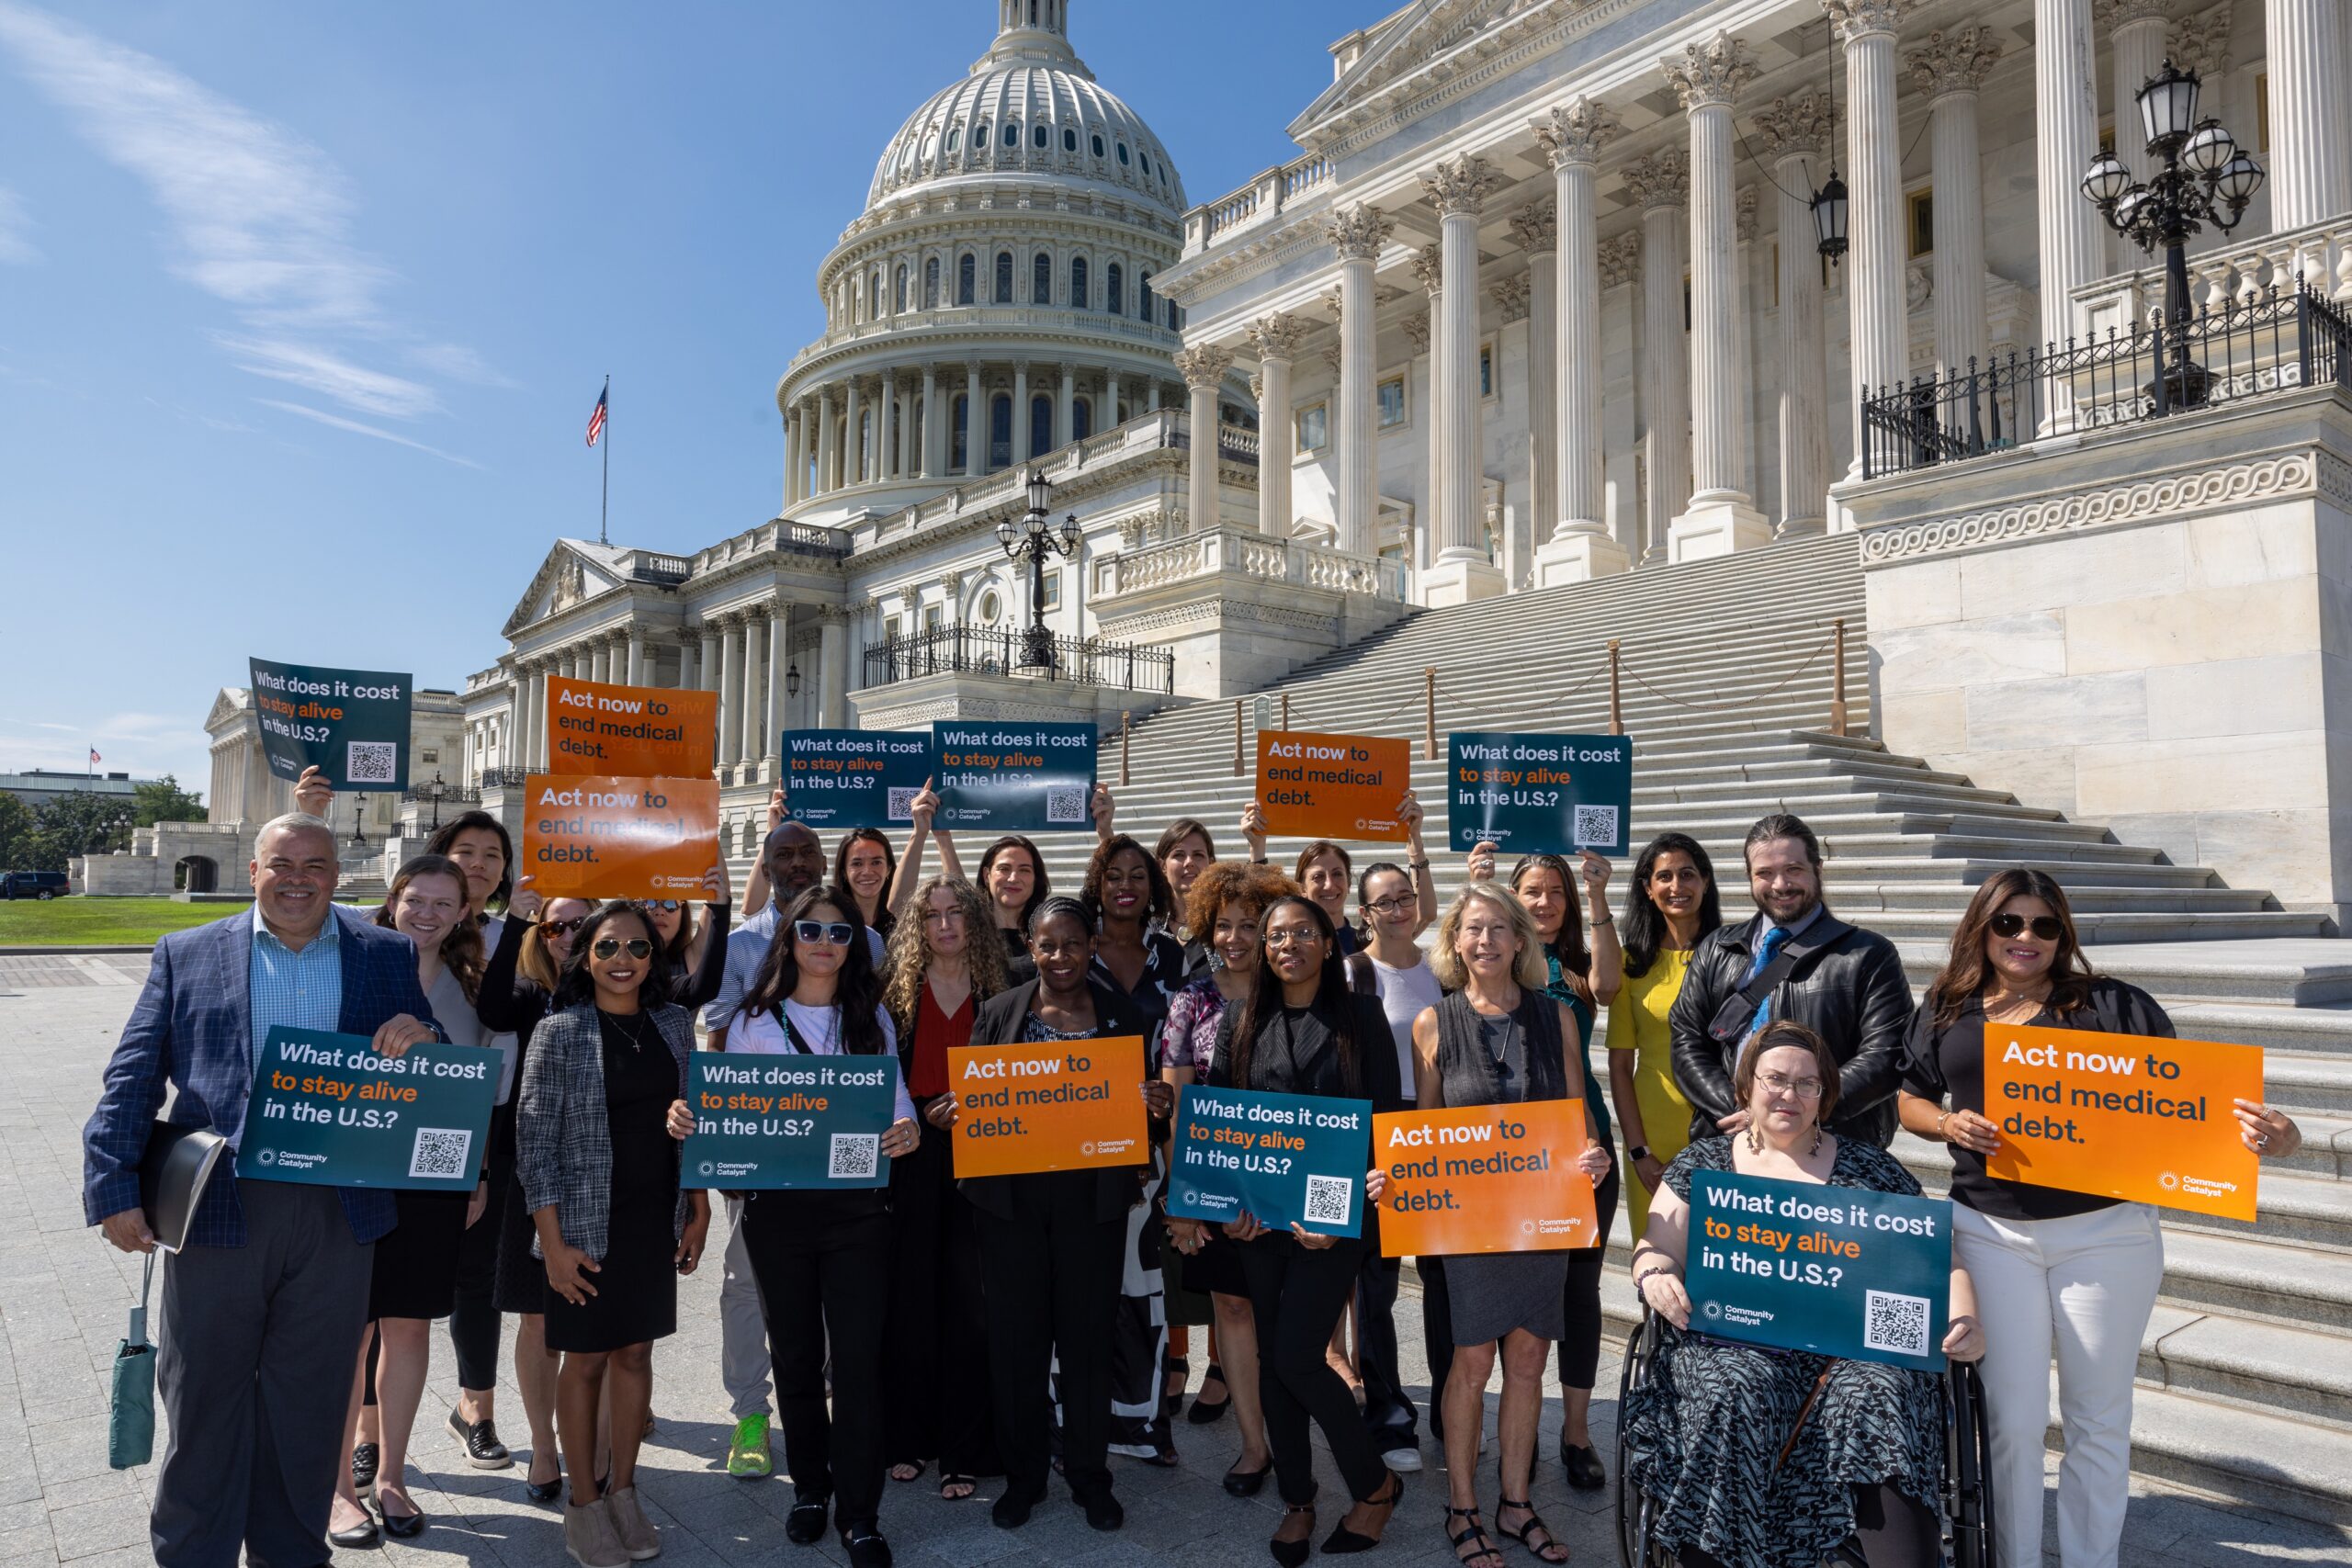 Group of community members , advocates, and Day of Action participants stand in front of steps of Capitol Hill and hold signs calling for action to end medical debt